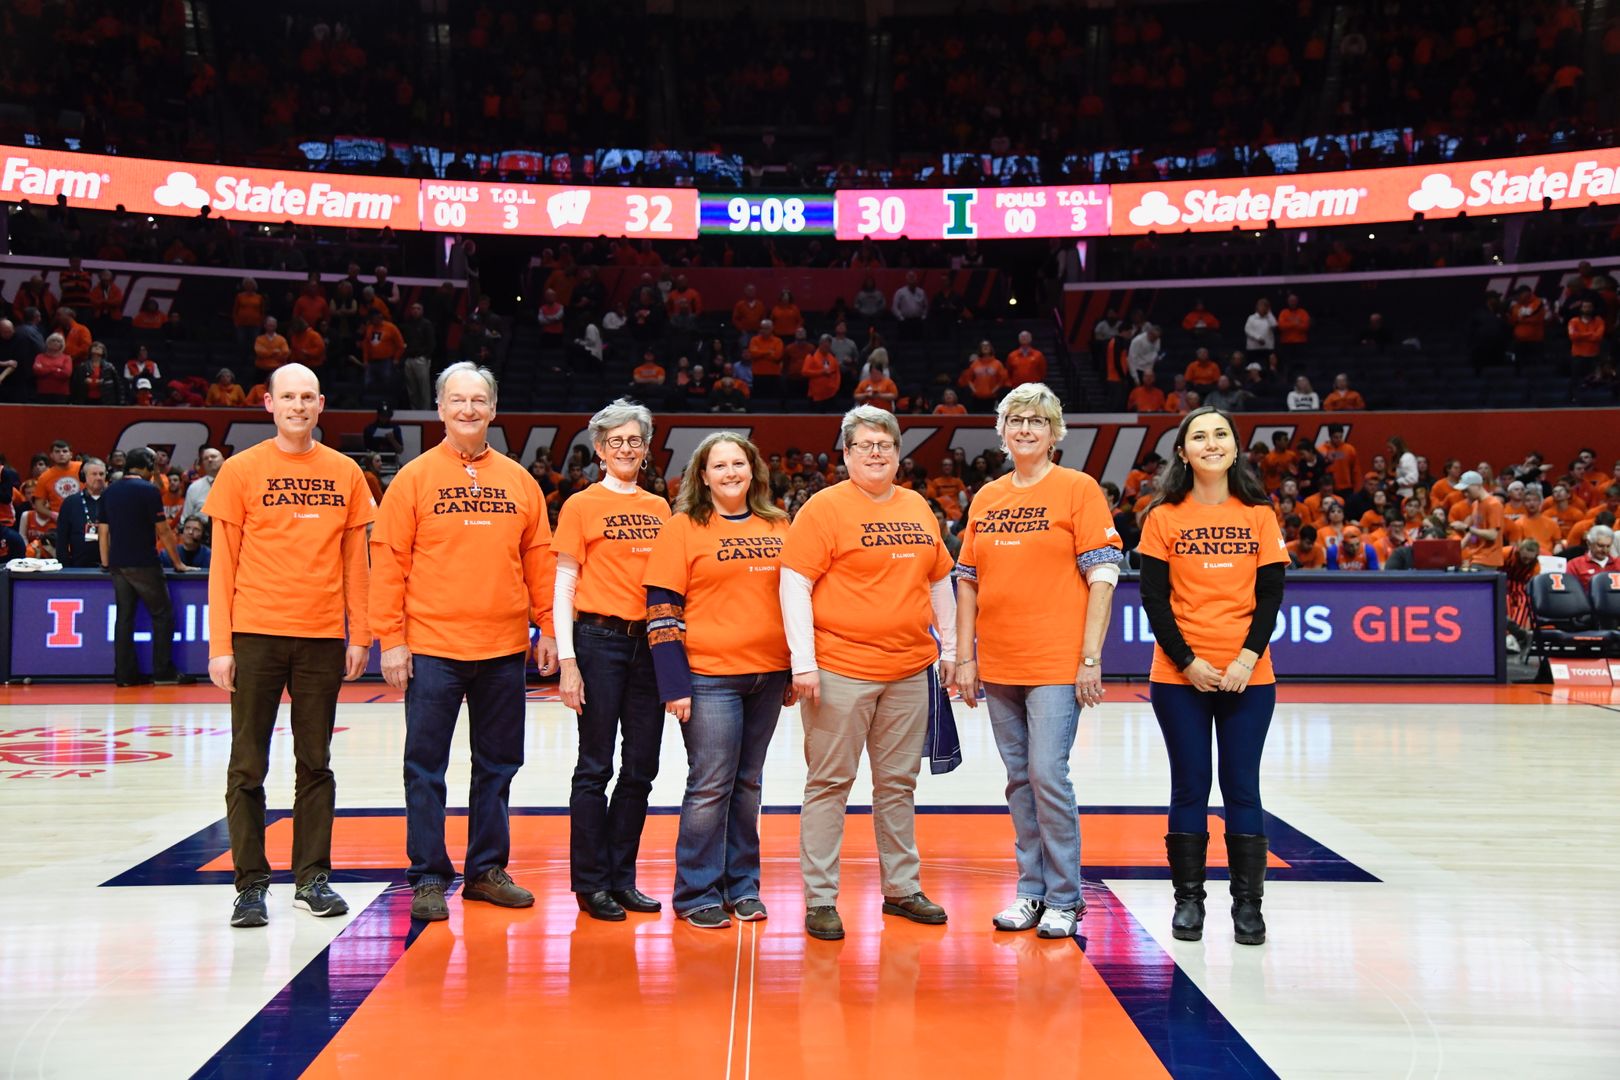 Seven people are standing in a line in the center of the basketball court at State Farm Center. They are wearing orange shirts that say Krush Cancer in blue.